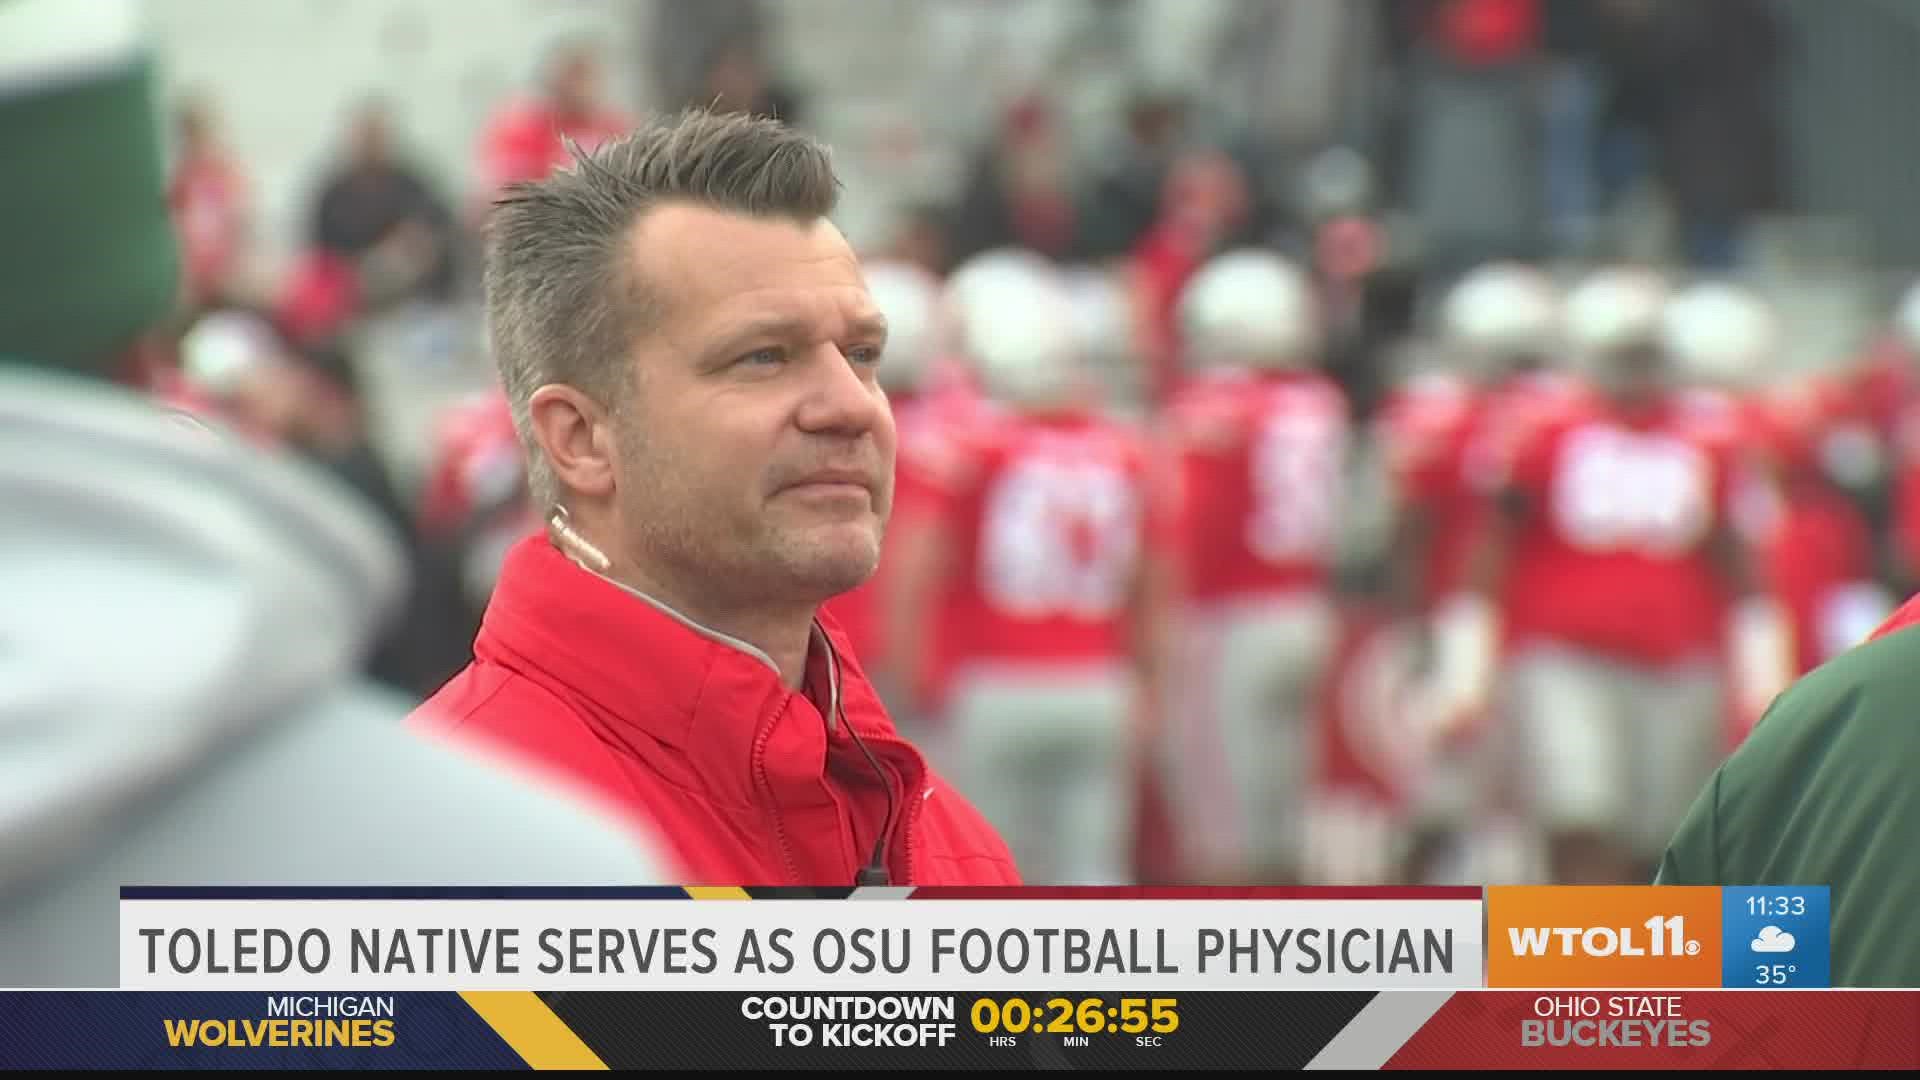 Ohio State Football's head team physician Dr. Bryant Walrod